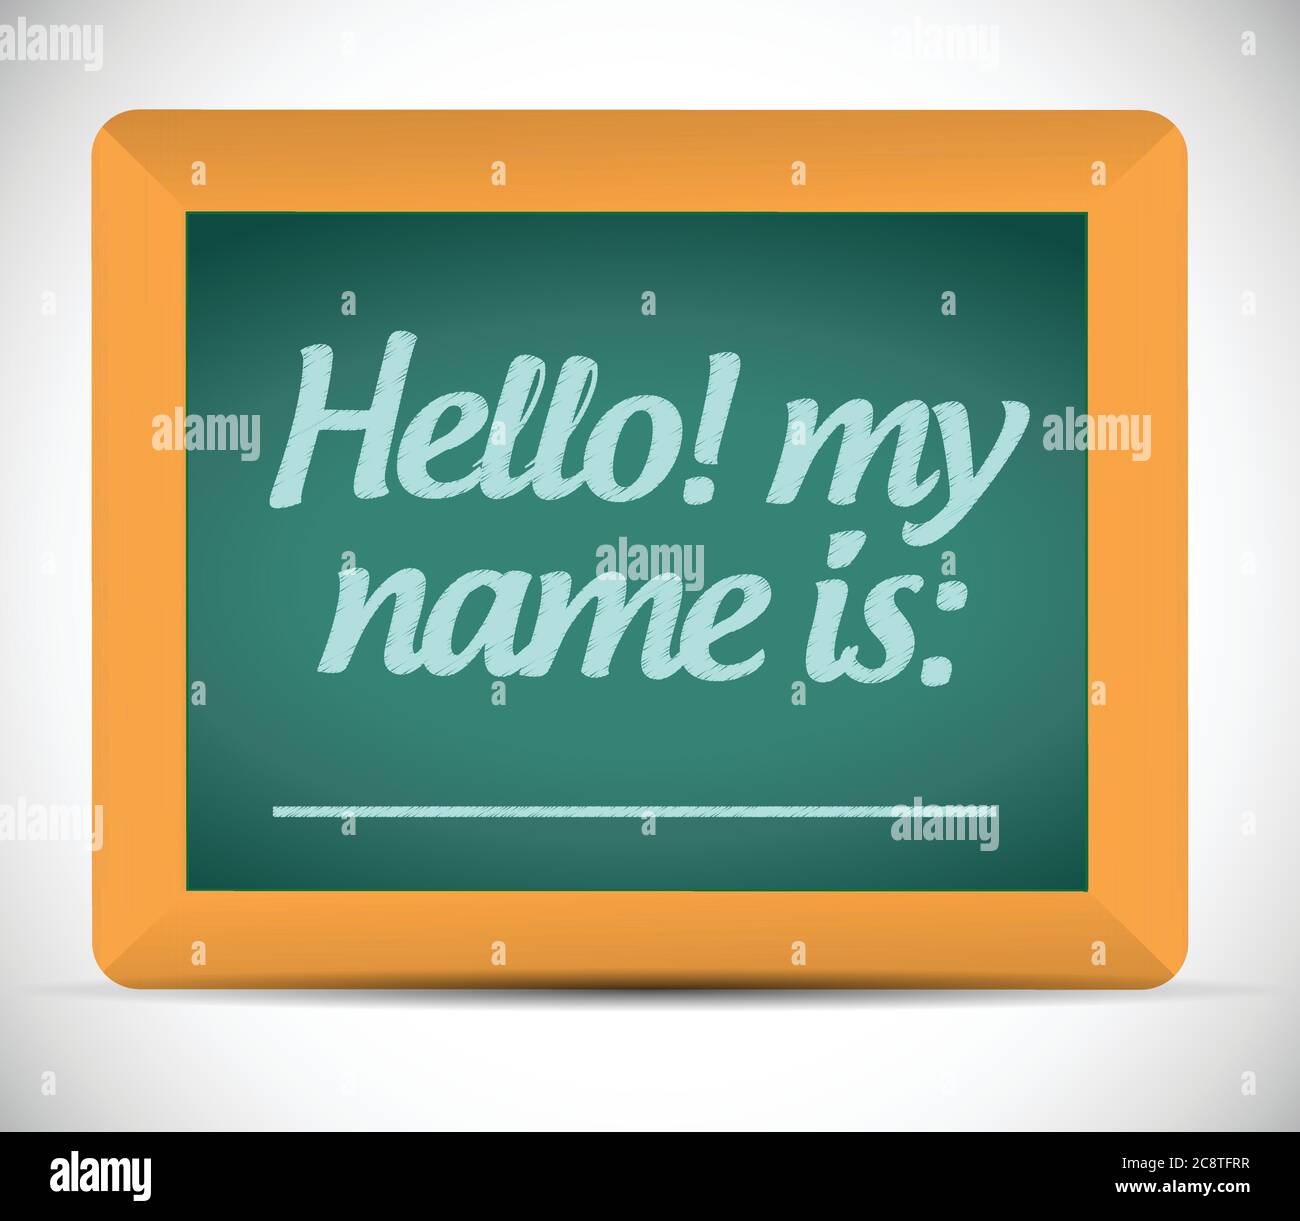 Hello my name is message on a chalkboard. illustration design over a white background Stock Vector